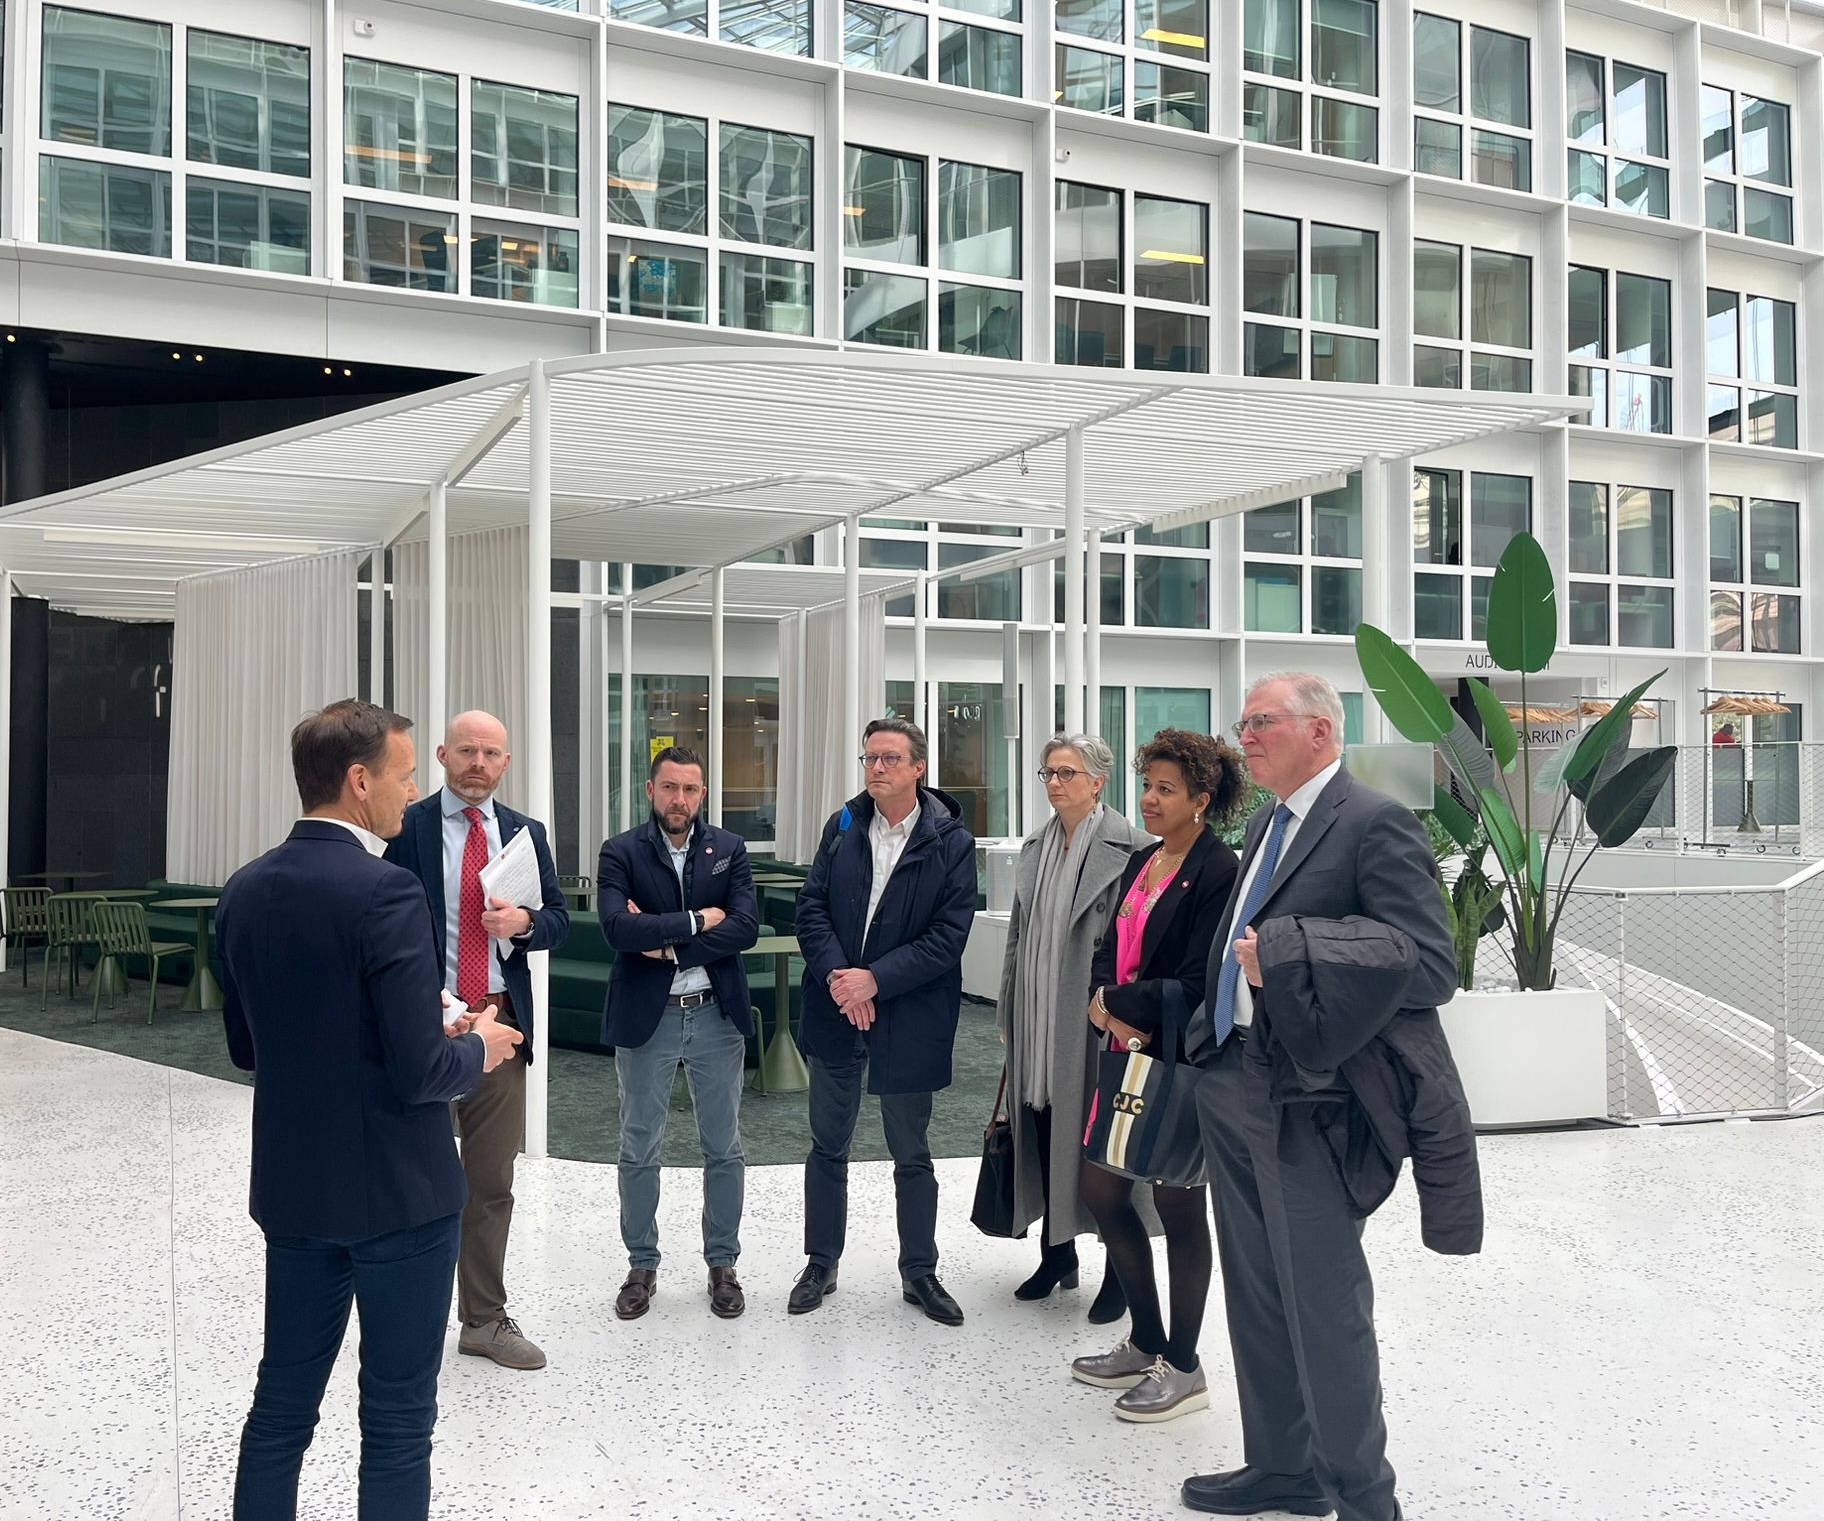 BIO delegation members at the PariSante Campus, a hub for companies in the data/AI space, in Paris.